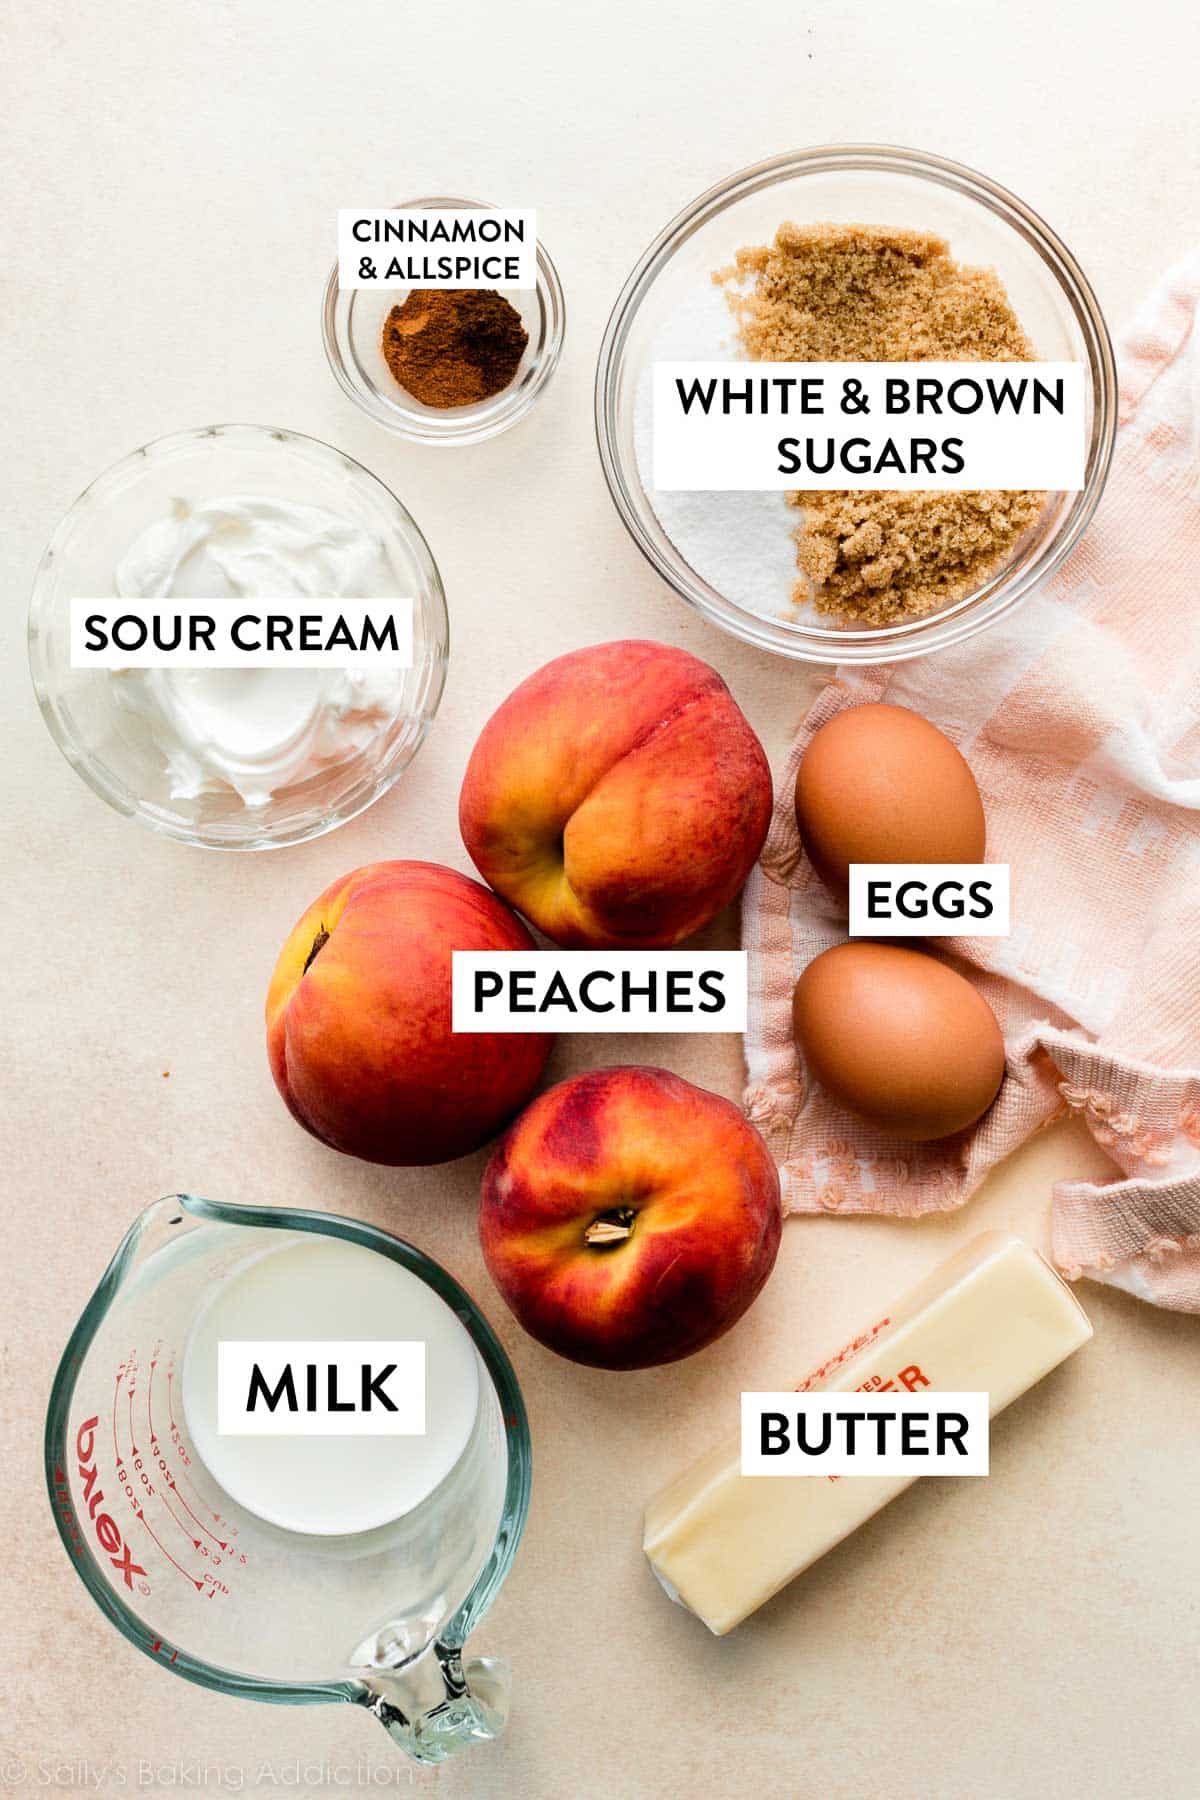 peaches, eggs, brown and white sugars, butter, milk, and other ingredients on peach backdrop.